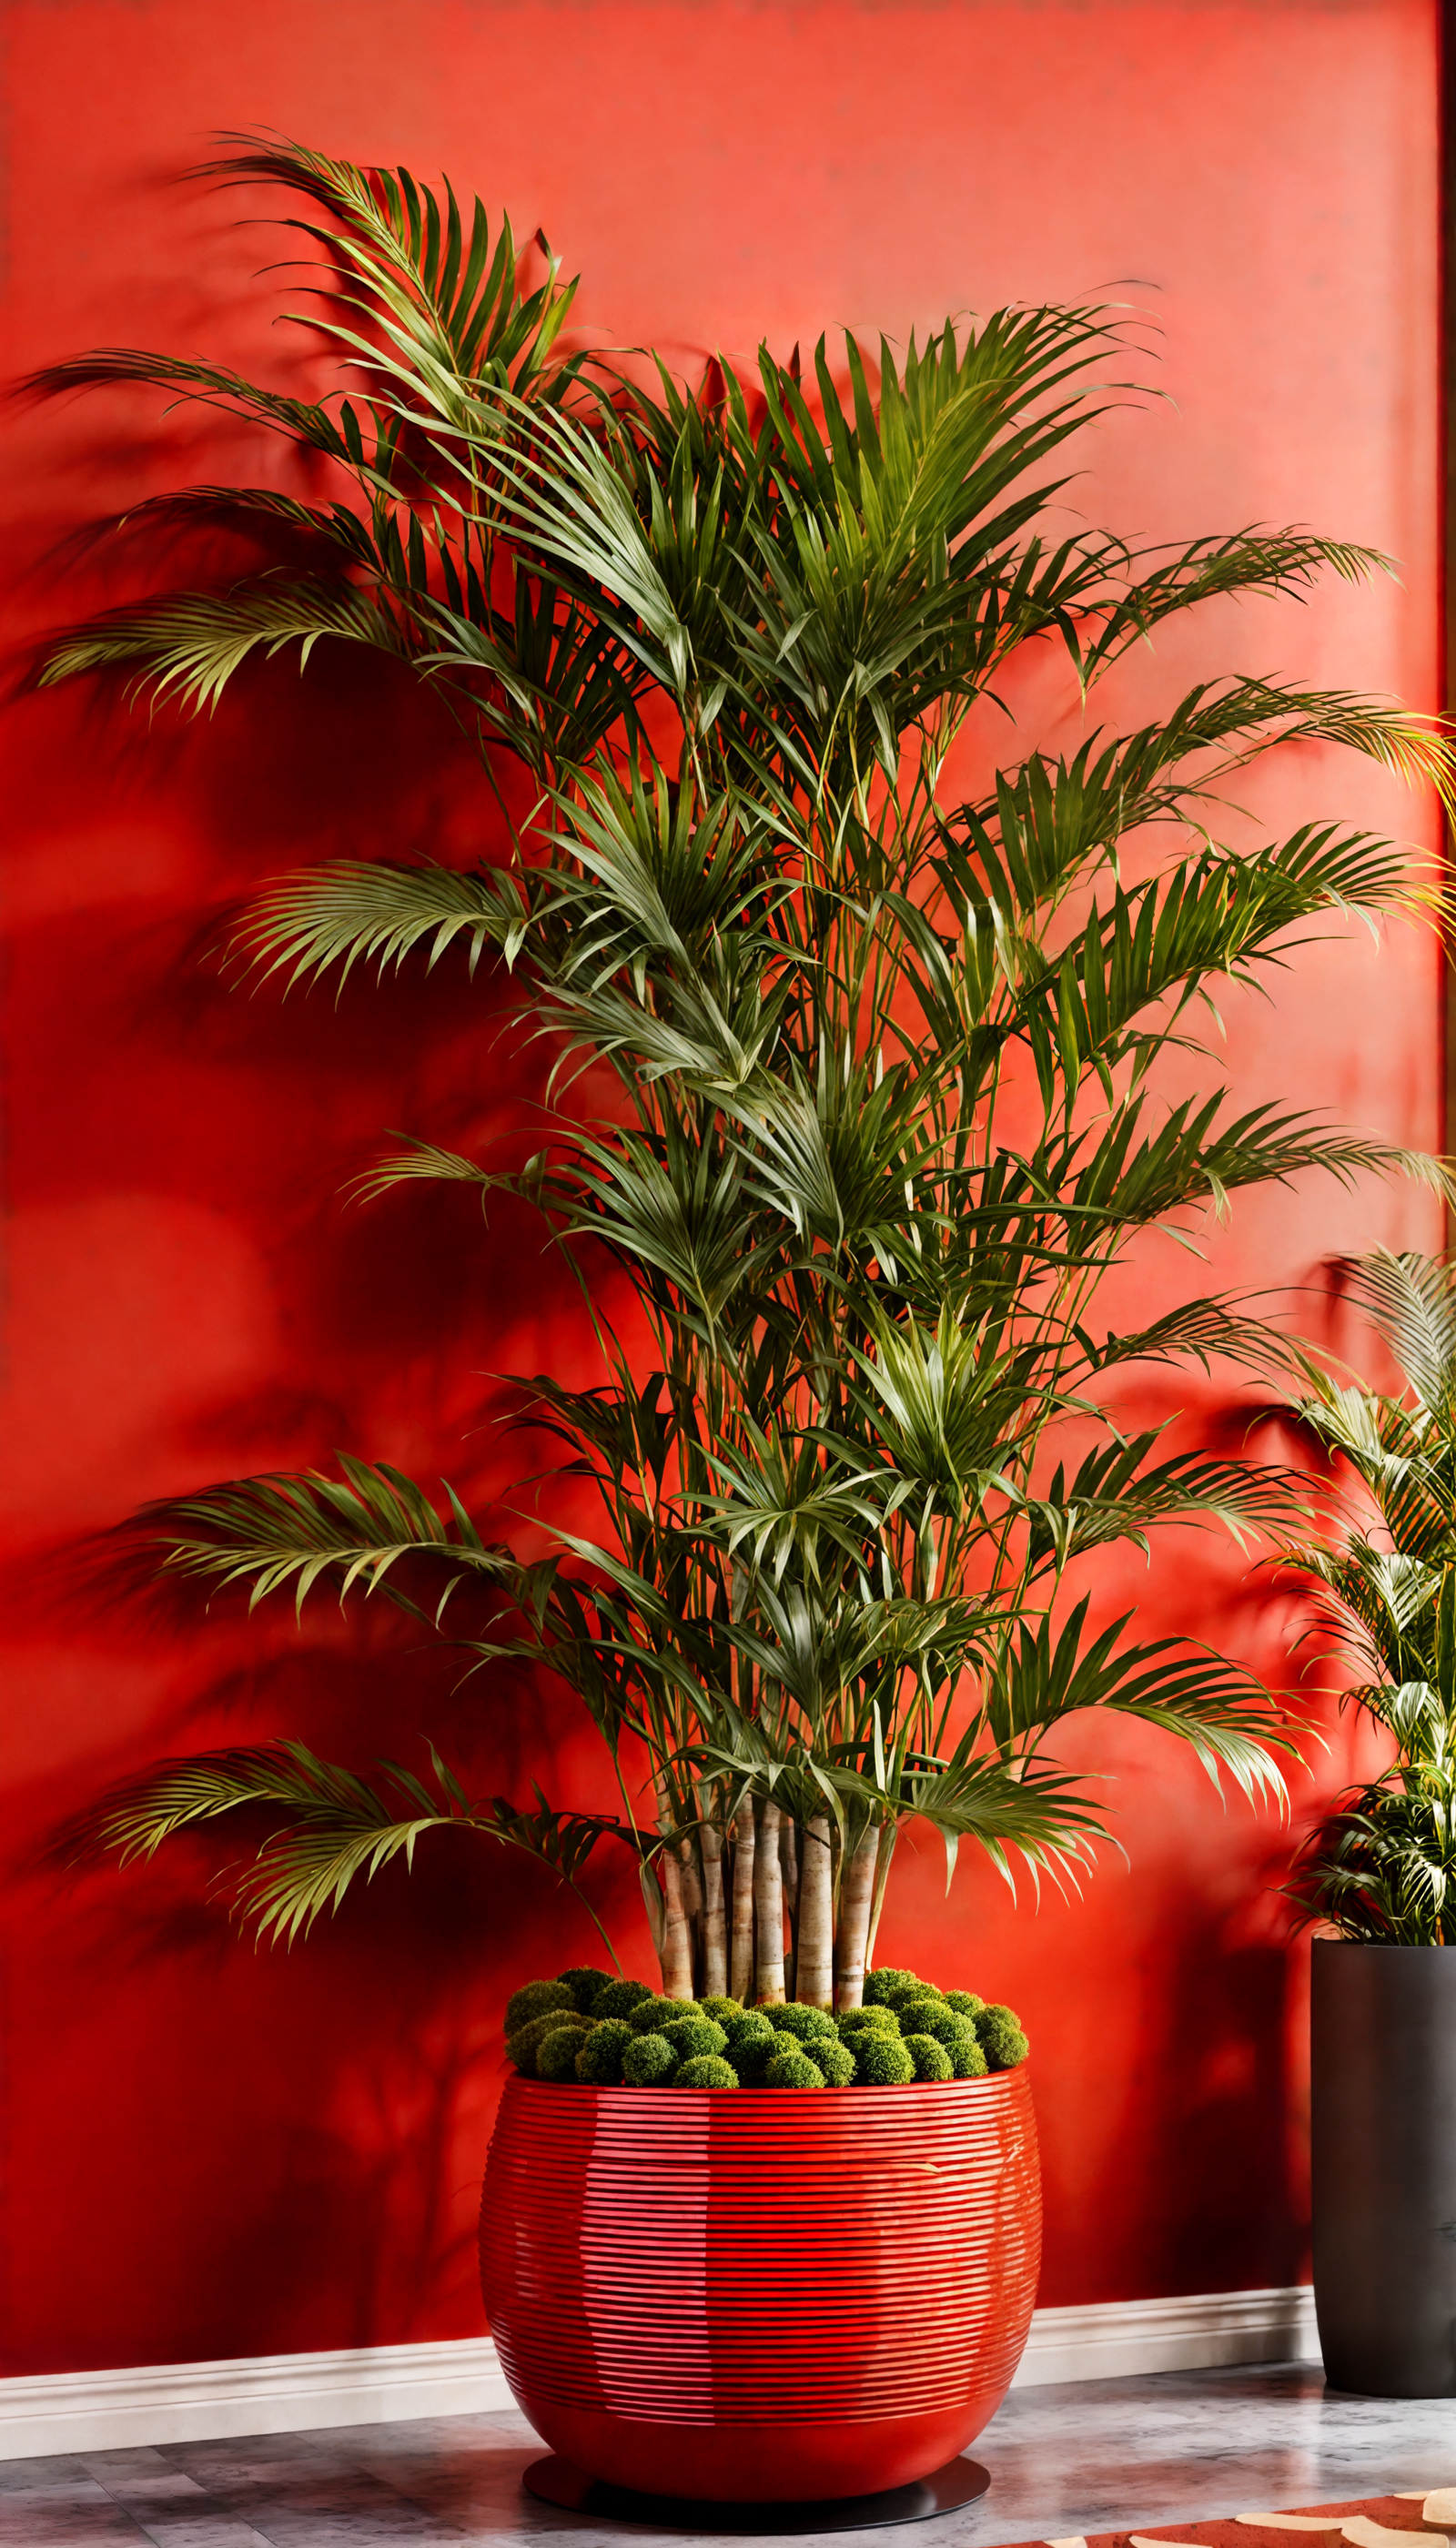 Dypsis lutescens in a red vase on a table, with clear lighting and neutral decor.